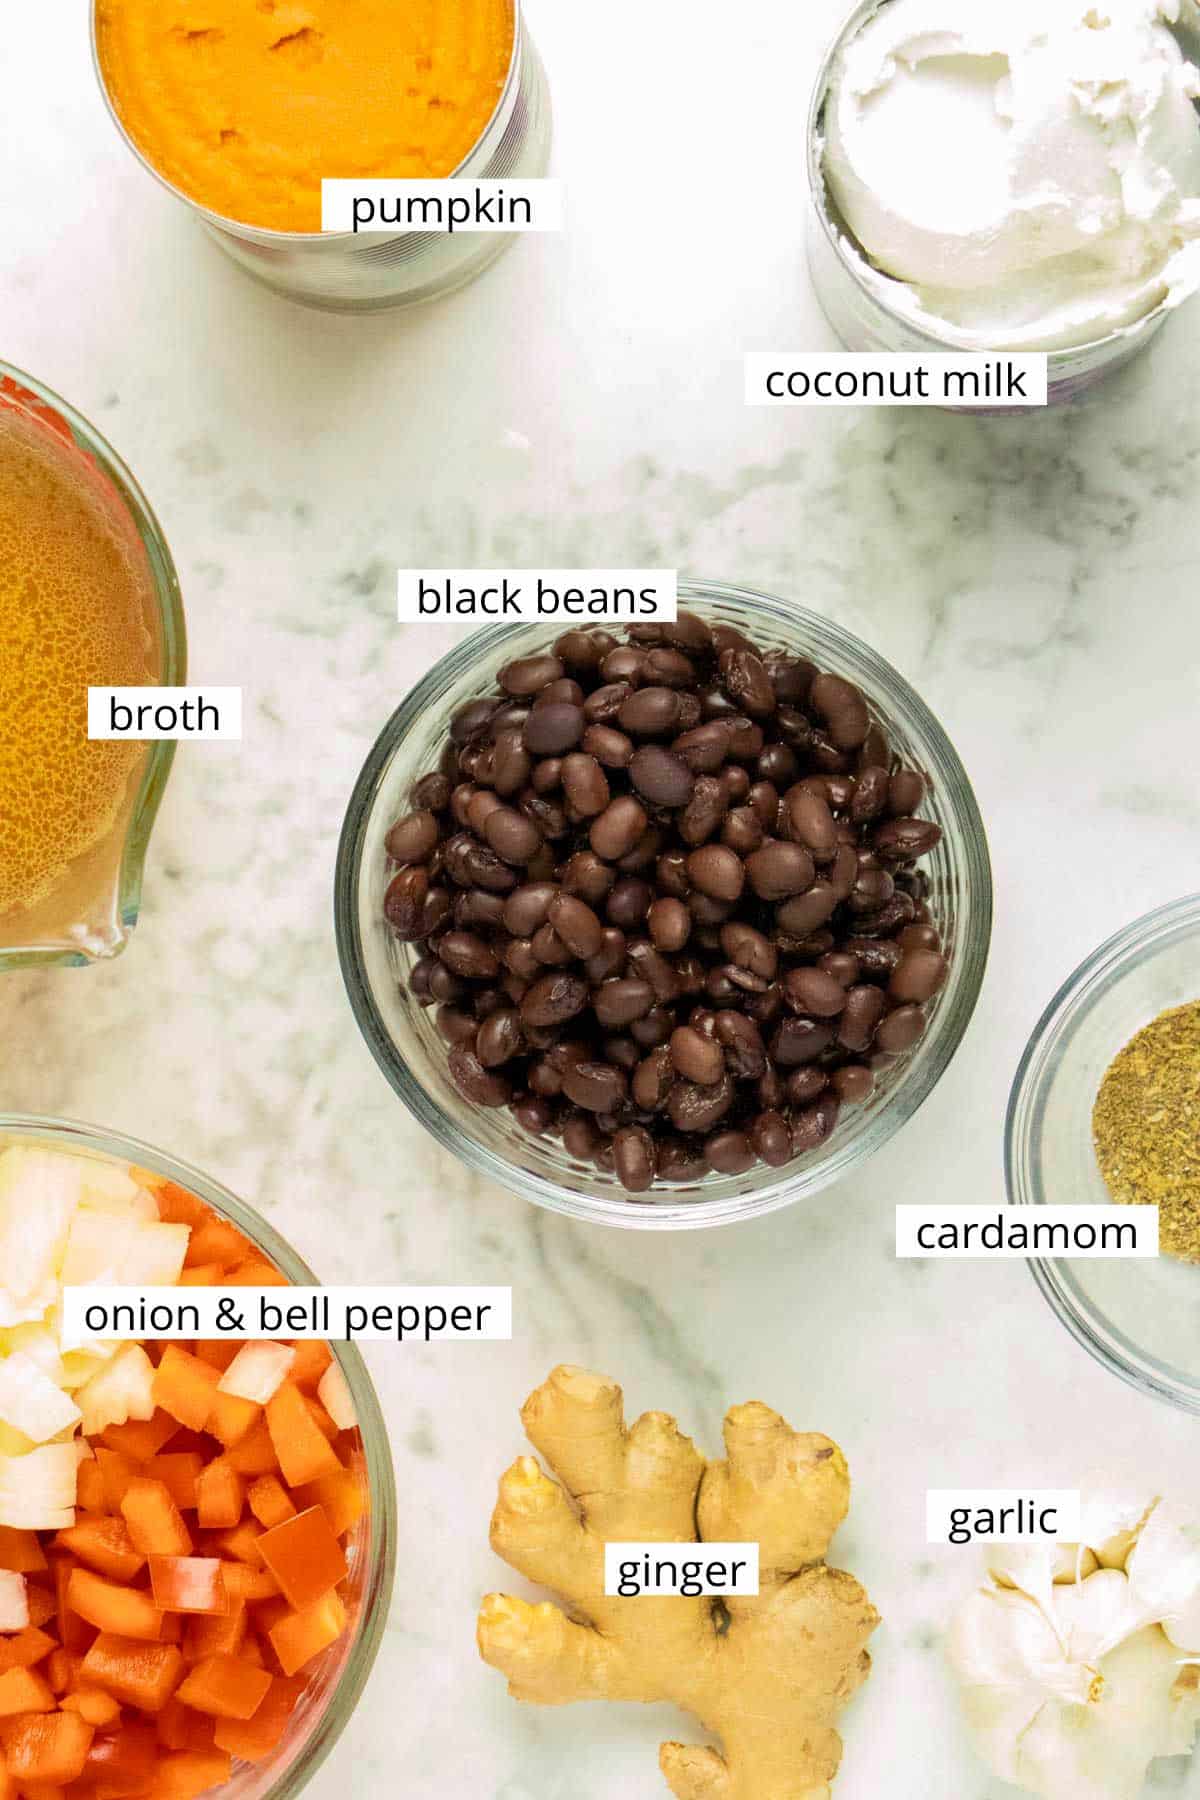 black beans, pumpkin, and other soup ingredients on a marble table with text labels on each one